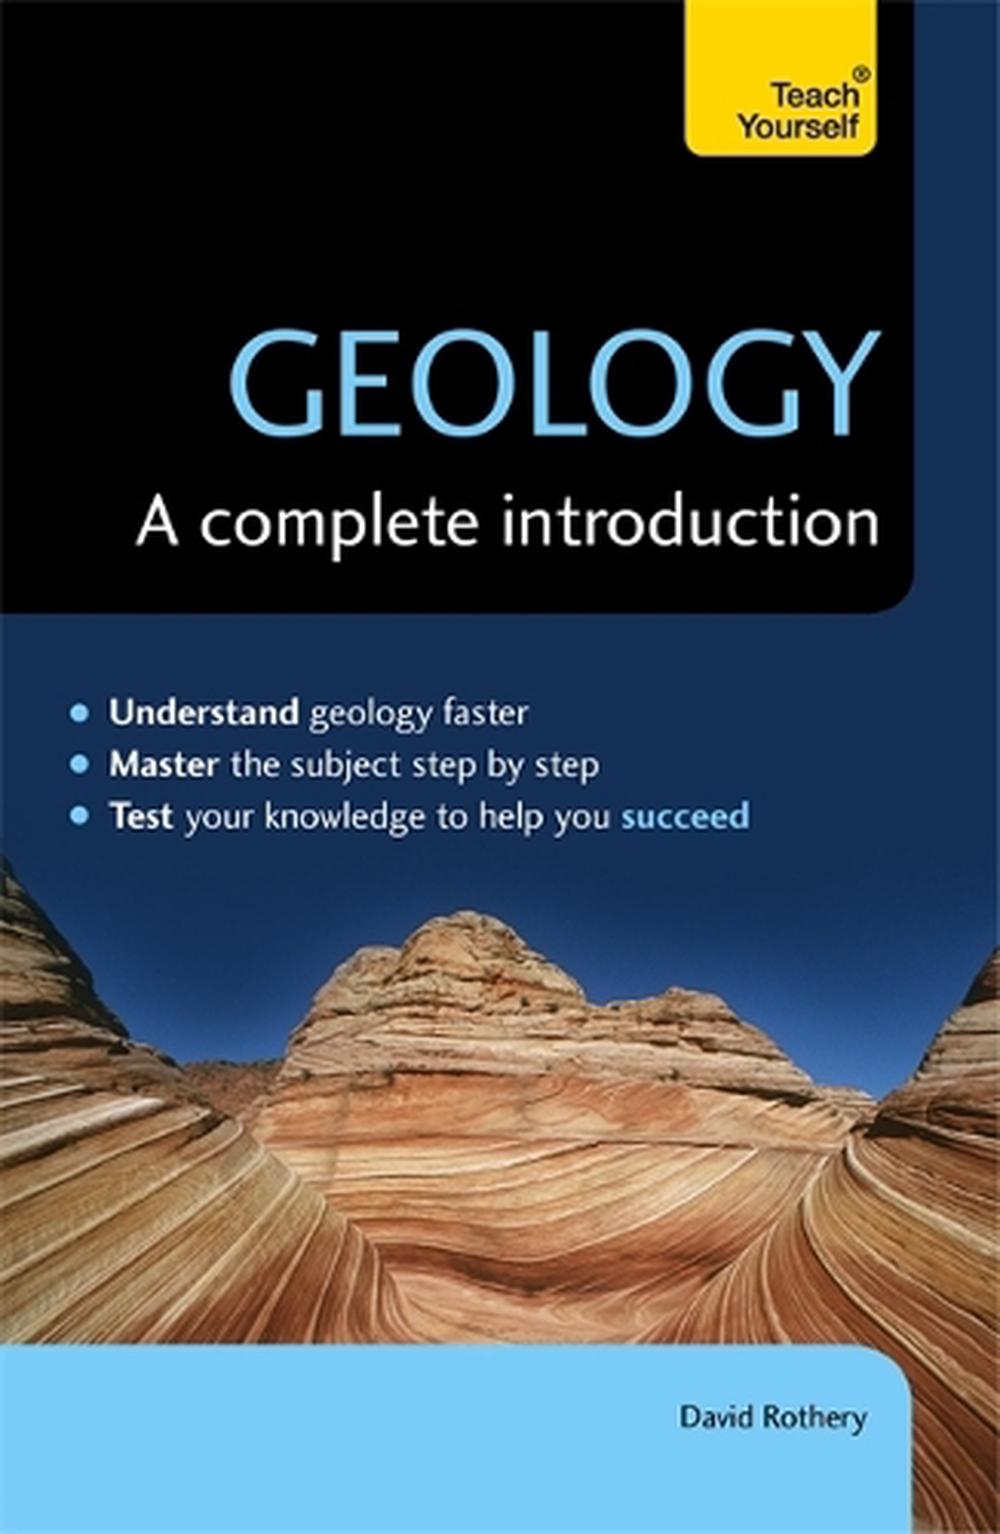 thesis ideas for geology